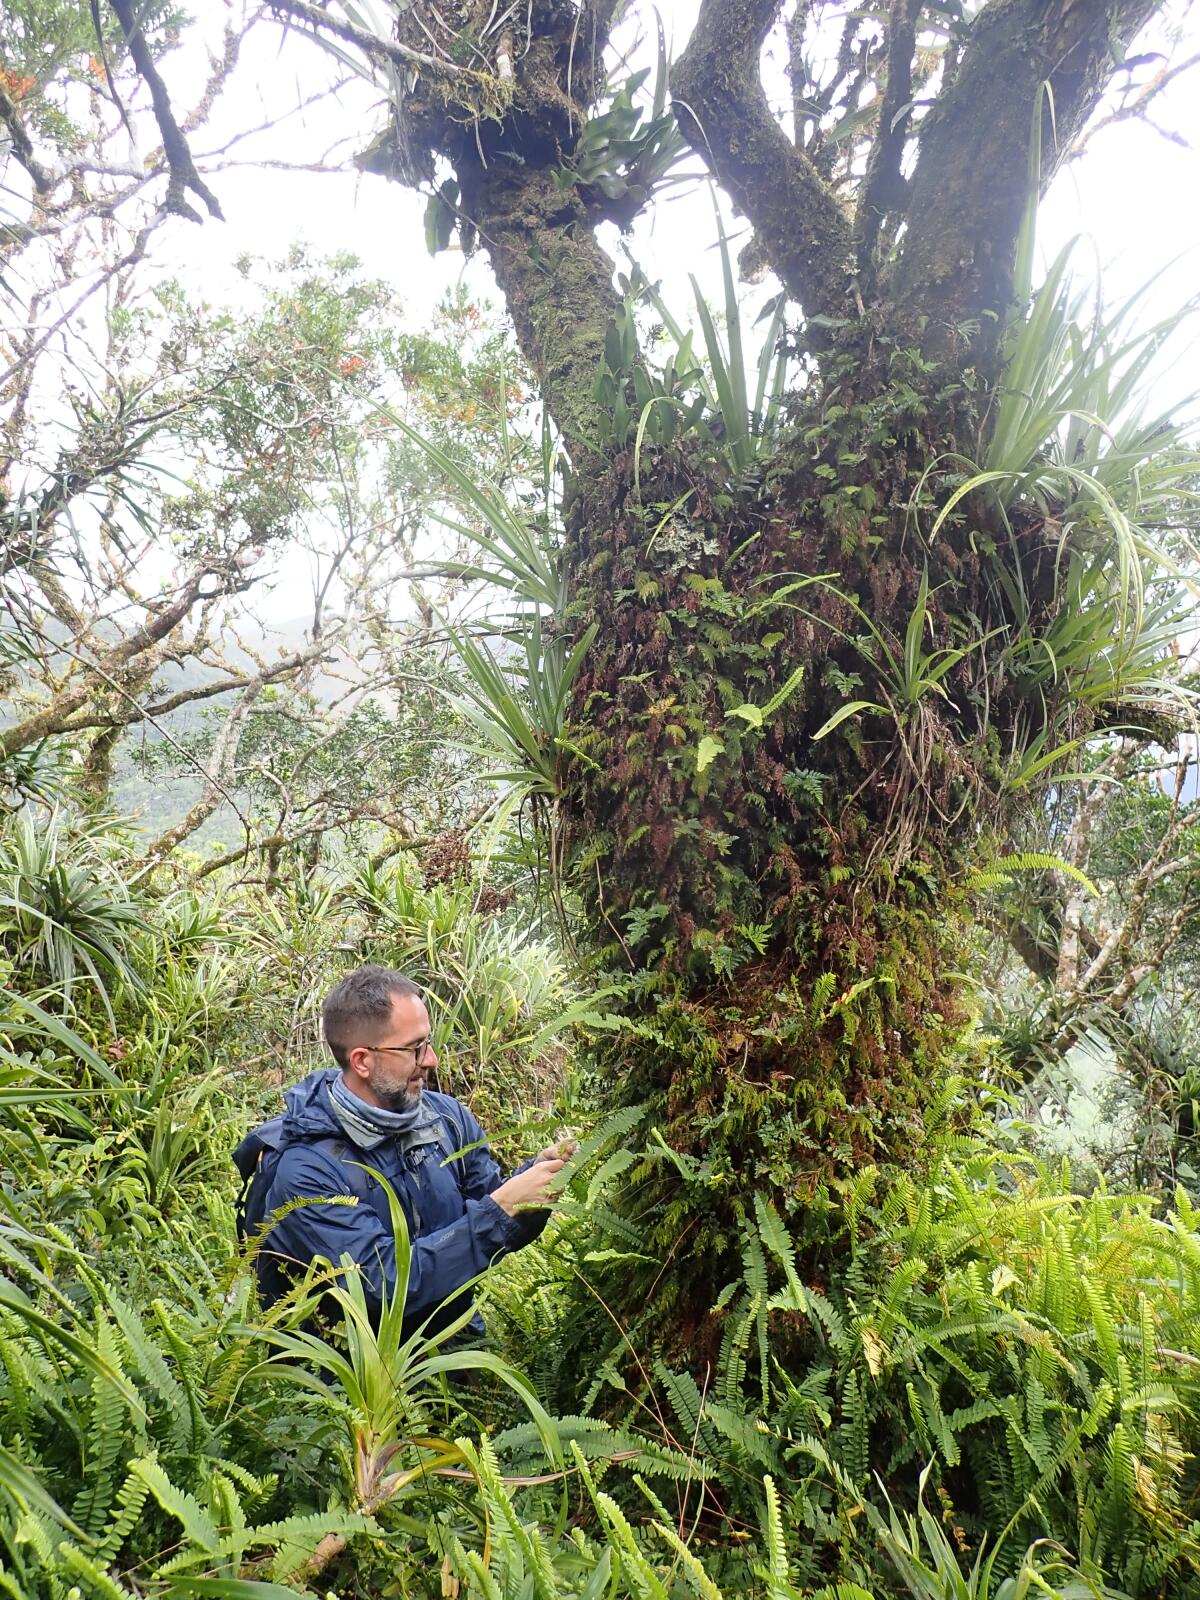 A man in a jacket next to a tree, surrounded by ferns and other foliage.